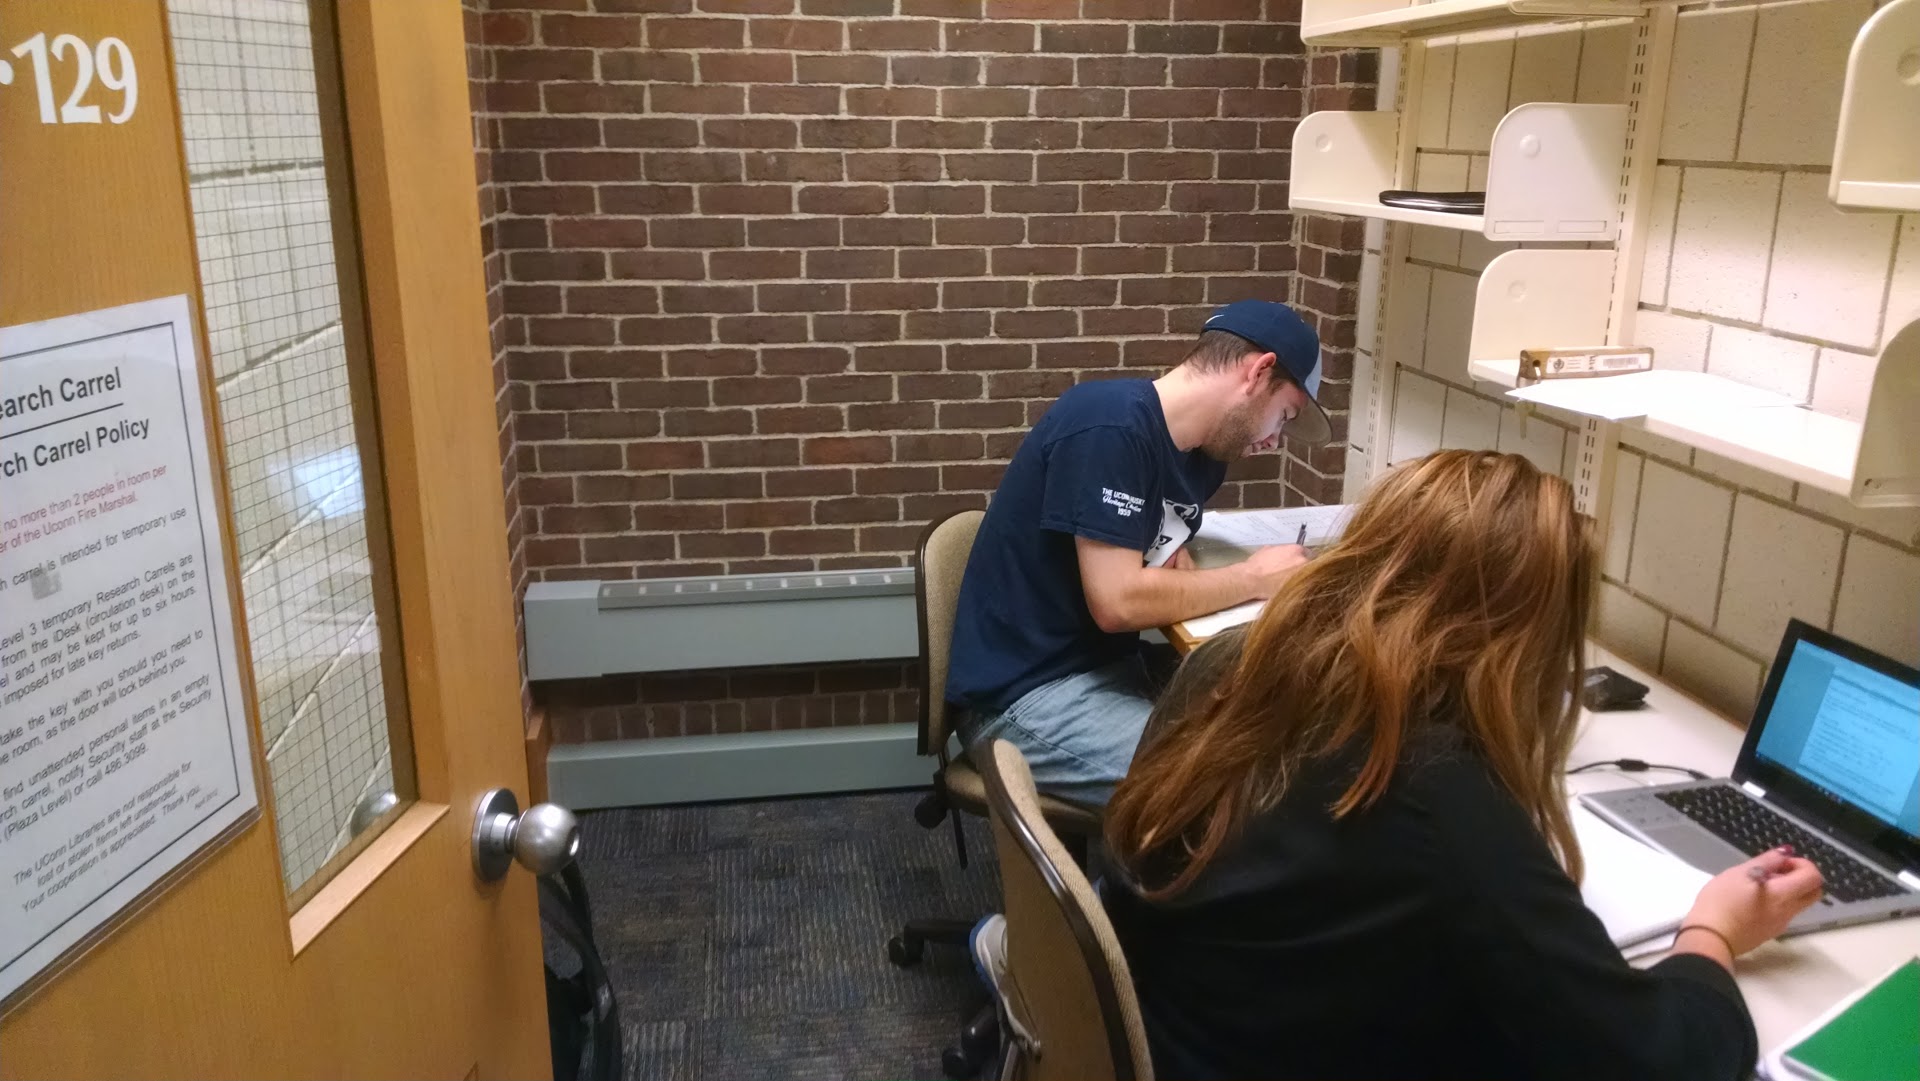 Level 3 Temporary Research Carrel 